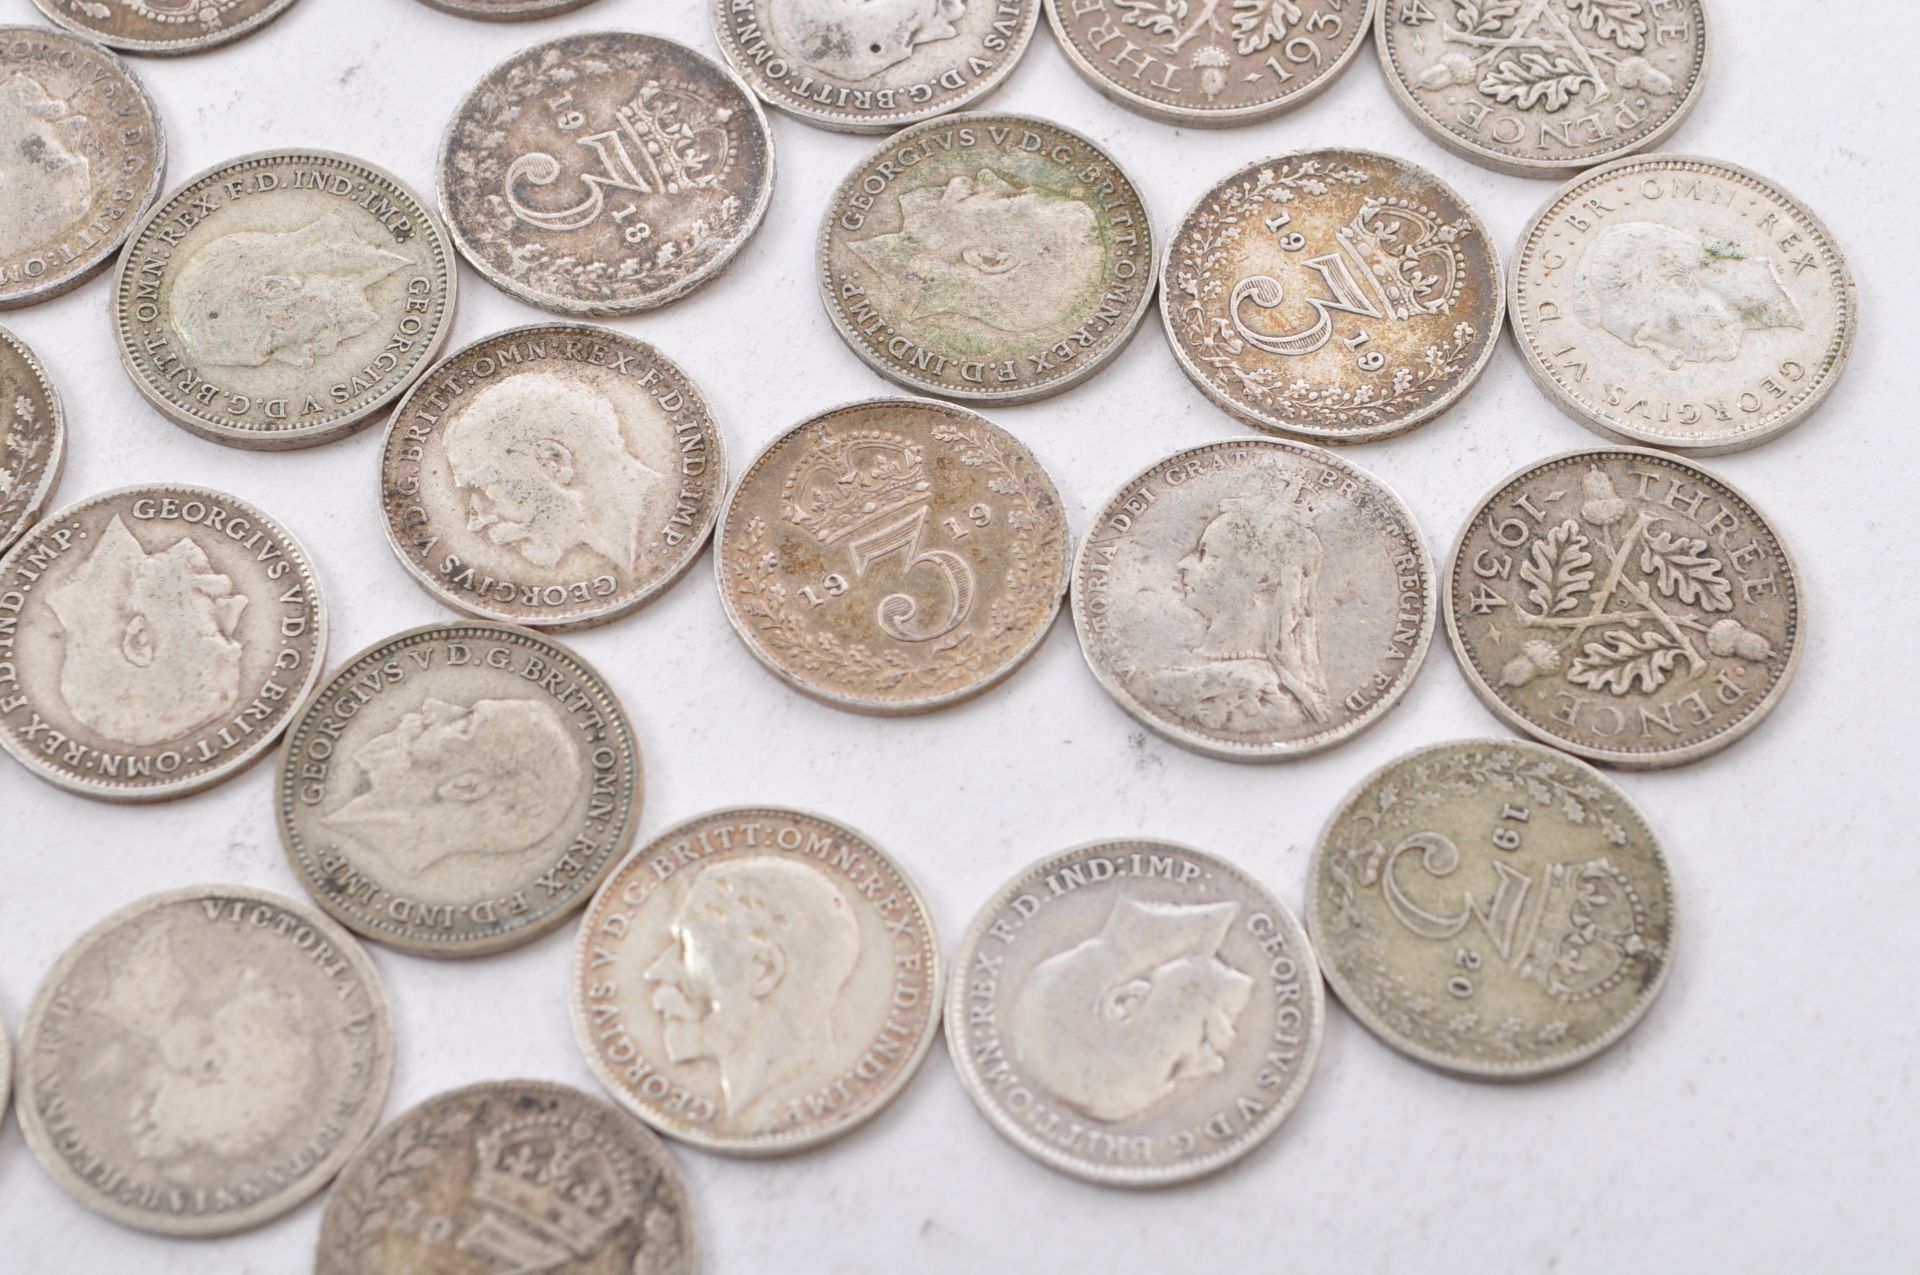 COLLECTION OF 19TH AND 20TH CENTURY SILVER THREE PENCE COINS - Image 8 of 9